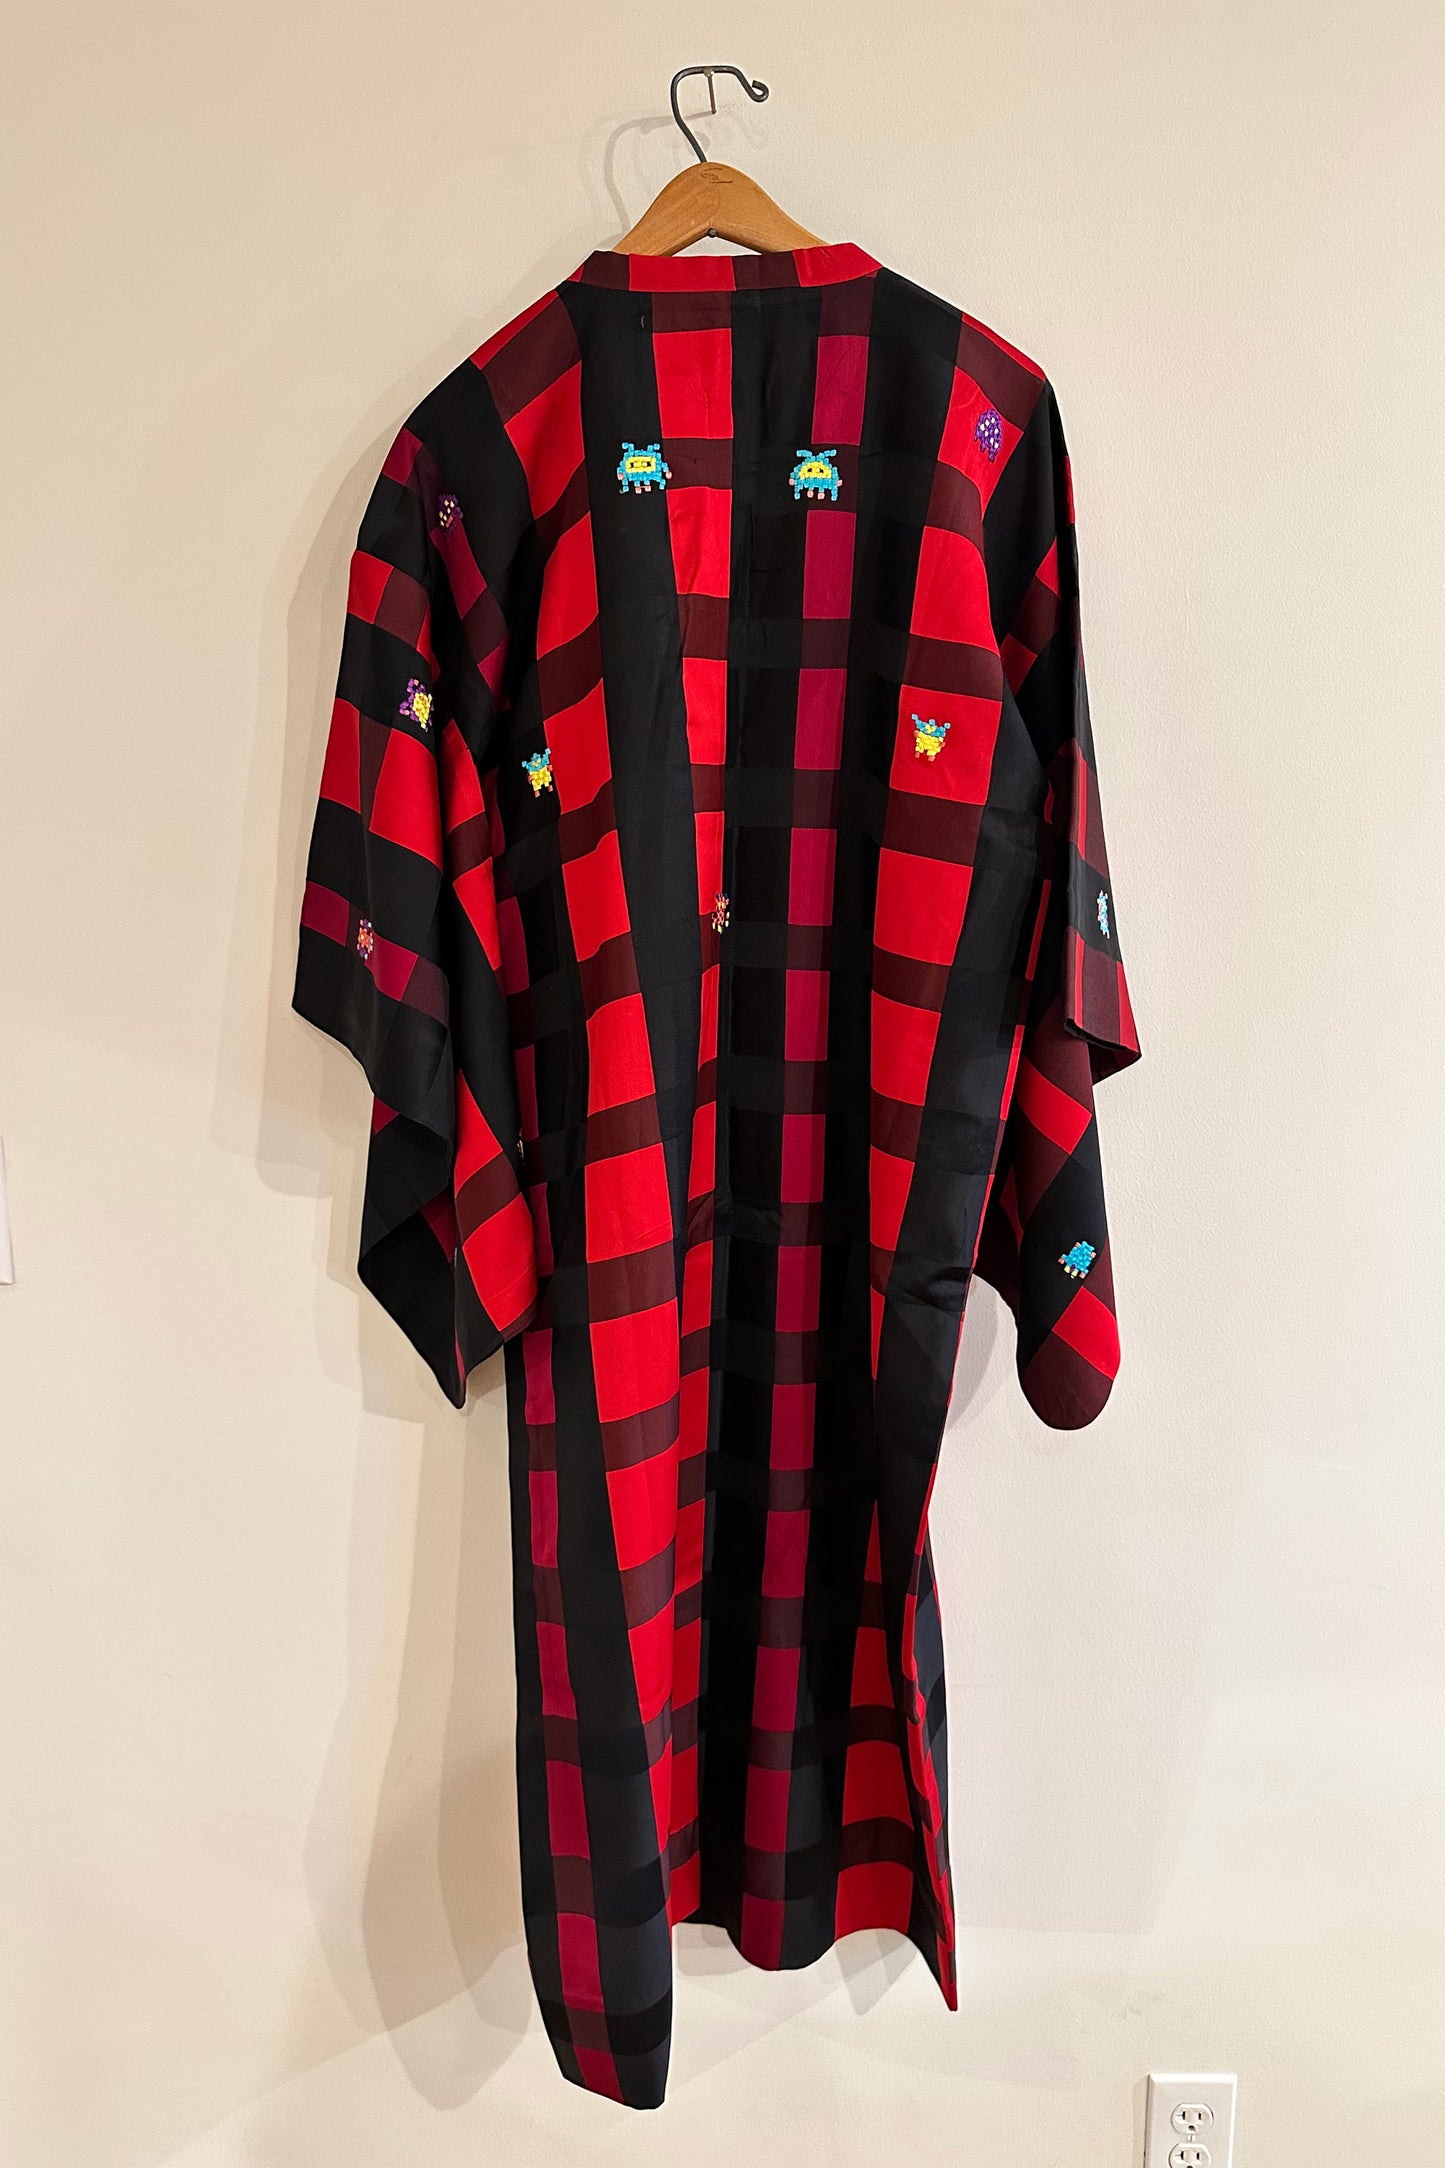 "Space Invaders" Black and Red Plaid Kimono